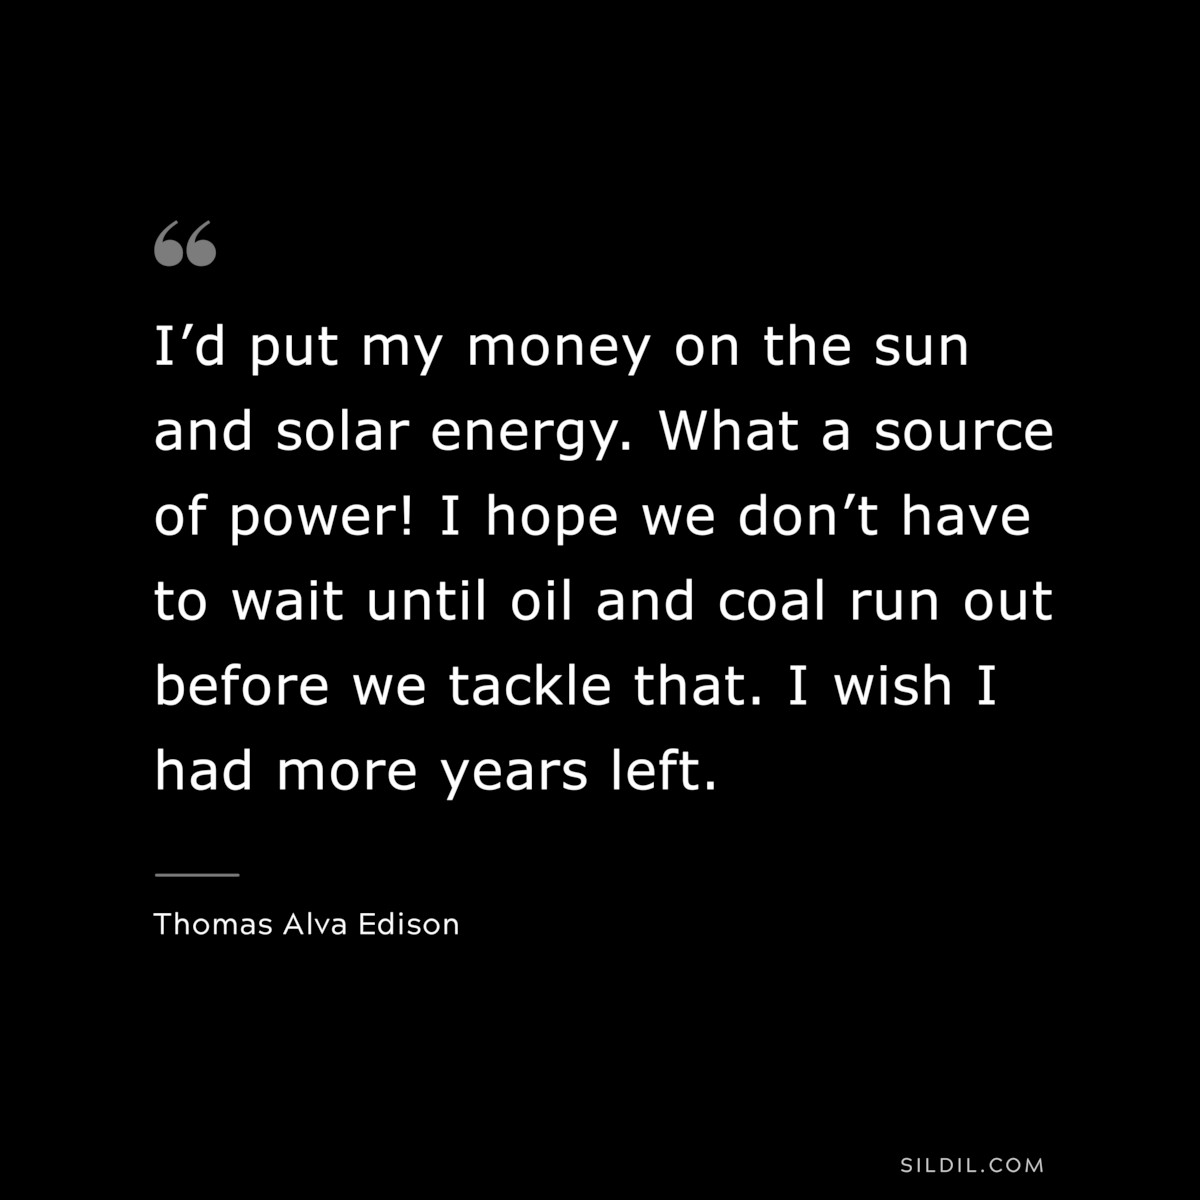 I’d put my money on the sun and solar energy. What a source of power! I hope we don’t have to wait until oil and coal run out before we tackle that. I wish I had more years left. ― Thomas Alva Edison